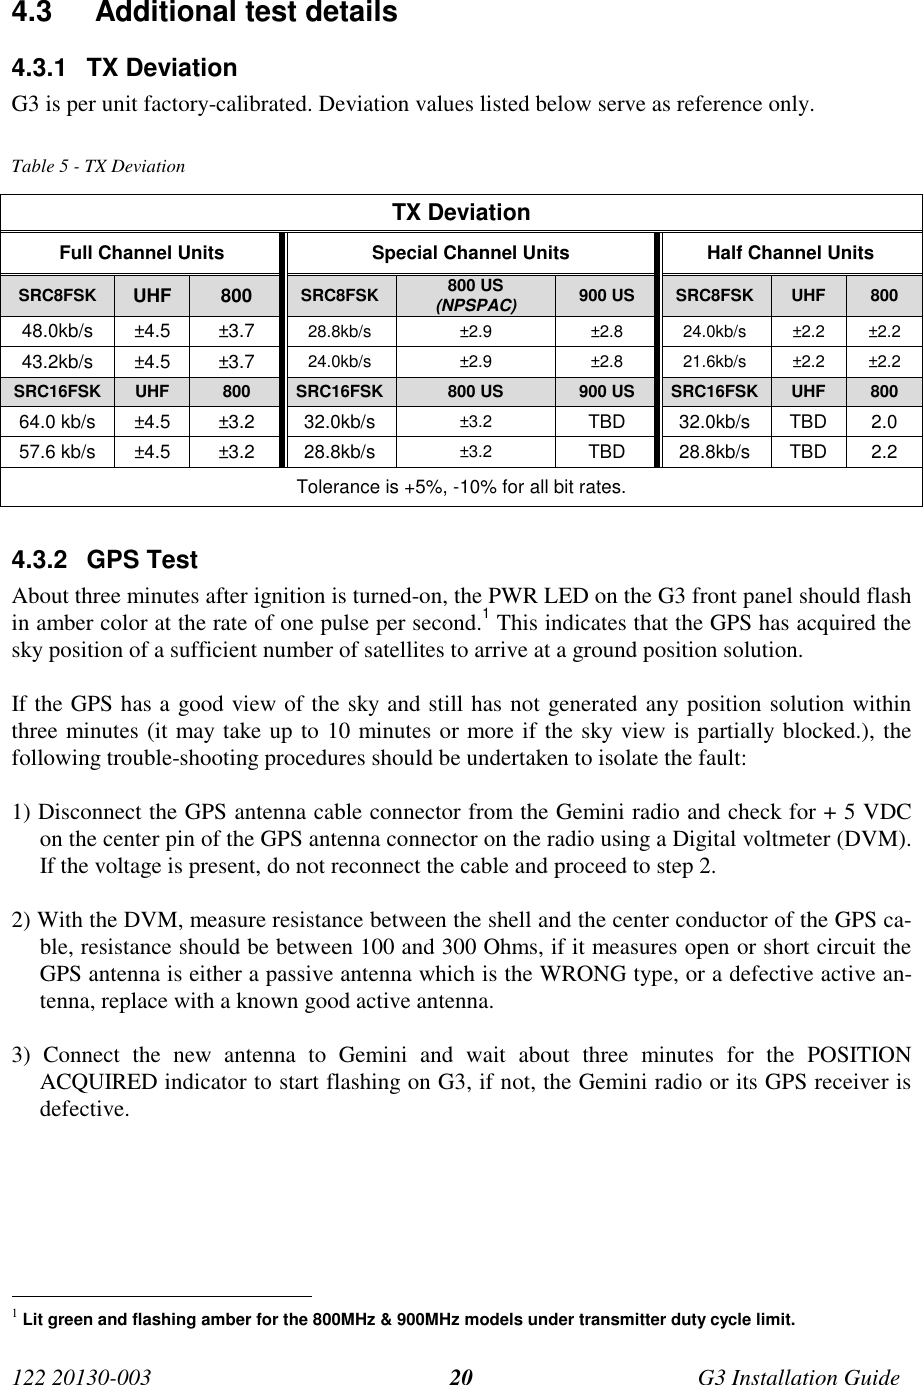 122 20130-003 G3 Installation Guide204.3   Additional test details4.3.1 TX DeviationG3 is per unit factory-calibrated. Deviation values listed below serve as reference only.Table 5 - TX DeviationTX DeviationFull Channel Units Special Channel Units Half Channel UnitsSRC8FSK UHF 800 SRC8FSK 800 US(NPSPAC) 900 US SRC8FSK UHF 80048.0kb/s ±4.5 ±3.7 28.8kb/s ±2.9 ±2.8 24.0kb/s ±2.2 ±2.243.2kb/s ±4.5 ±3.7 24.0kb/s ±2.9 ±2.8 21.6kb/s ±2.2 ±2.2SRC16FSK UHF 800 SRC16FSK 800 US 900 US SRC16FSK UHF 80064.0 kb/s ±4.5 ±3.2 32.0kb/s ±3.2 TBD 32.0kb/s TBD 2.057.6 kb/s ±4.5 ±3.2 28.8kb/s ±3.2 TBD 28.8kb/s TBD 2.2Tolerance is +5%, -10% for all bit rates.4.3.2 GPS TestAbout three minutes after ignition is turned-on, the PWR LED on the G3 front panel should flashin amber color at the rate of one pulse per second.1 This indicates that the GPS has acquired thesky position of a sufficient number of satellites to arrive at a ground position solution.If the GPS has a good view of the sky and still has not generated any position solution withinthree minutes (it may take up to 10 minutes or more if the sky view is partially blocked.), thefollowing trouble-shooting procedures should be undertaken to isolate the fault:1) Disconnect the GPS antenna cable connector from the Gemini radio and check for + 5 VDCon the center pin of the GPS antenna connector on the radio using a Digital voltmeter (DVM).If the voltage is present, do not reconnect the cable and proceed to step 2.2) With the DVM, measure resistance between the shell and the center conductor of the GPS ca-ble, resistance should be between 100 and 300 Ohms, if it measures open or short circuit theGPS antenna is either a passive antenna which is the WRONG type, or a defective active an-tenna, replace with a known good active antenna.3) Connect the new antenna to Gemini and wait about three minutes for the POSITIONACQUIRED indicator to start flashing on G3, if not, the Gemini radio or its GPS receiver isdefective.                                                     1 Lit green and flashing amber for the 800MHz &amp; 900MHz models under transmitter duty cycle limit.